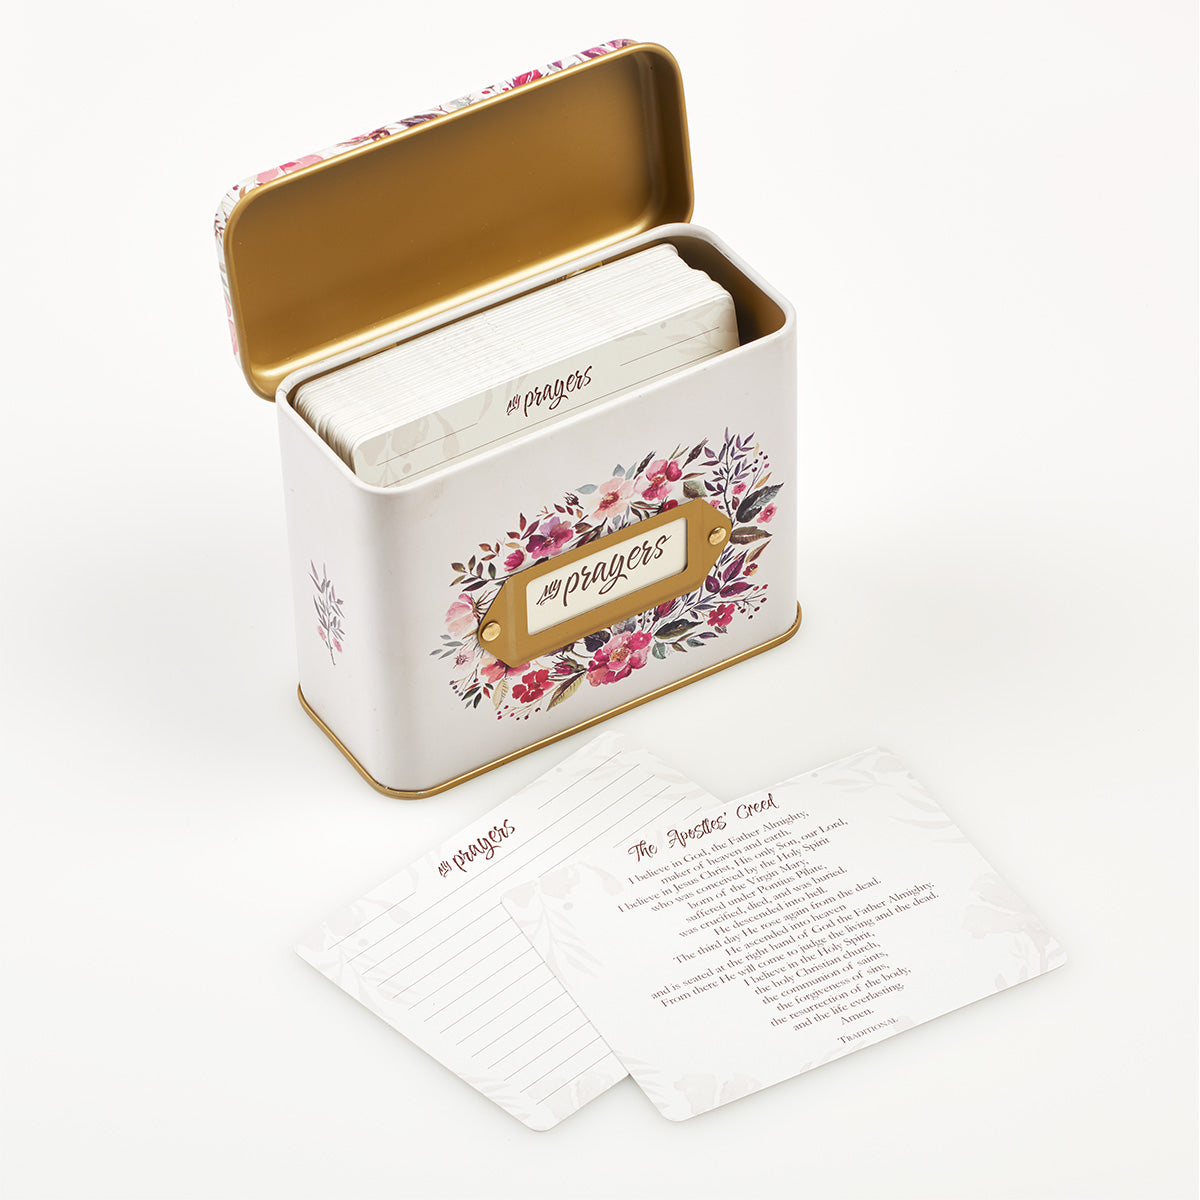 My Prayers Prayer Cards in a Tin - The Christian Gift Company